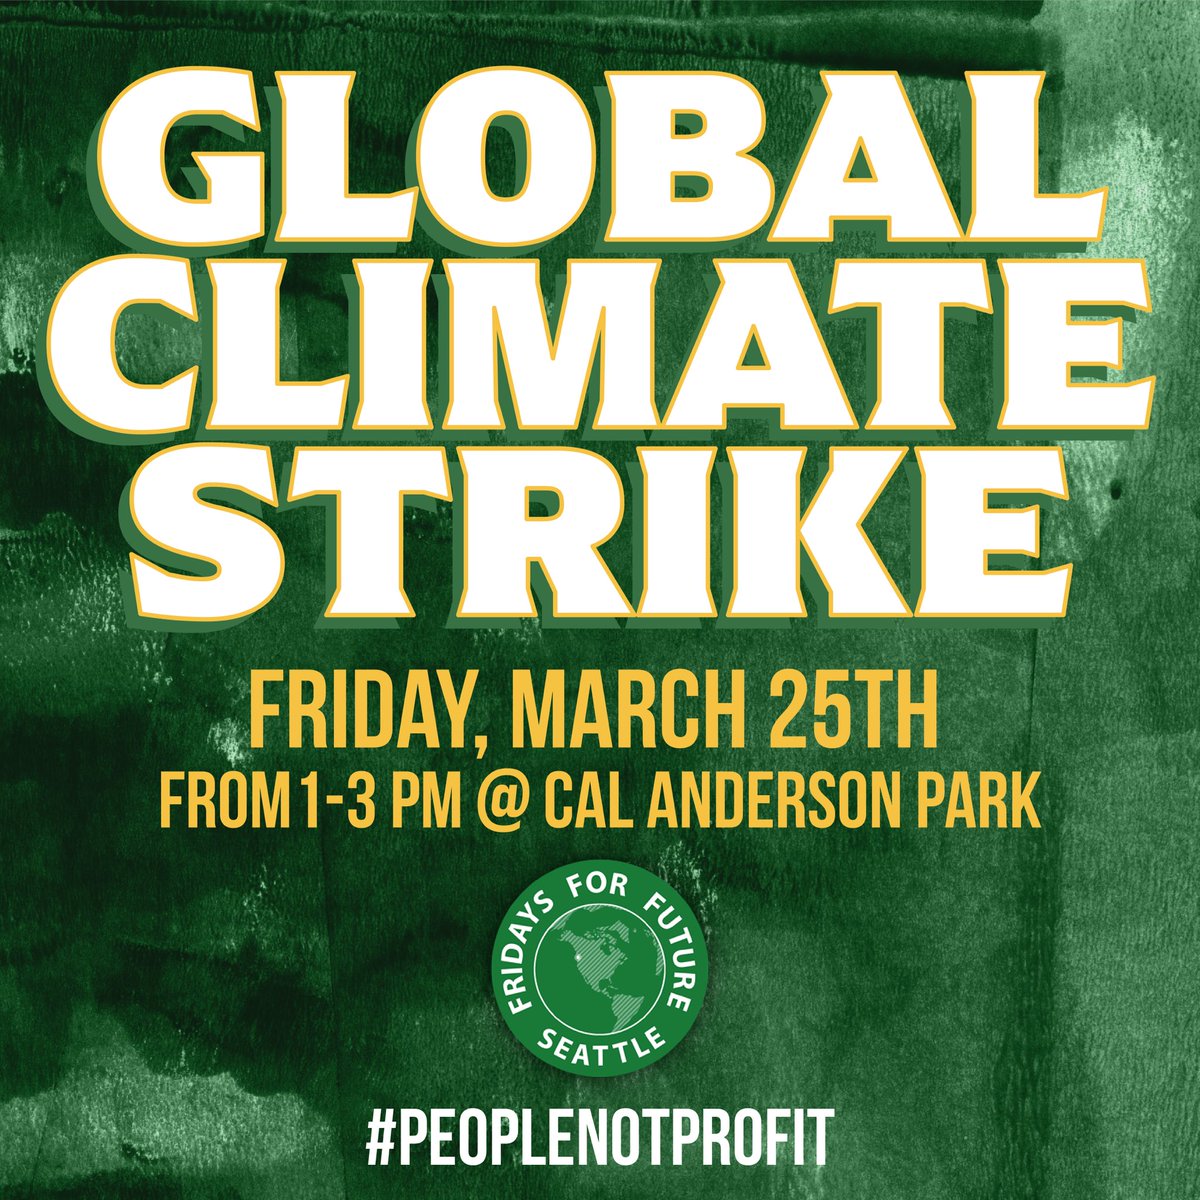 Global Climate Strike - Seattle Friday 1pm Racism, War, Loss of Bio-Diversity, Poverty, Hunger, Desecration of Indigenous Lands, & Env Destruction are all made WORSE by Fossil Fuels & the #ClimateEmergency. Friday we Strike to make it Better! #PeopleOverProfit #climateJustice